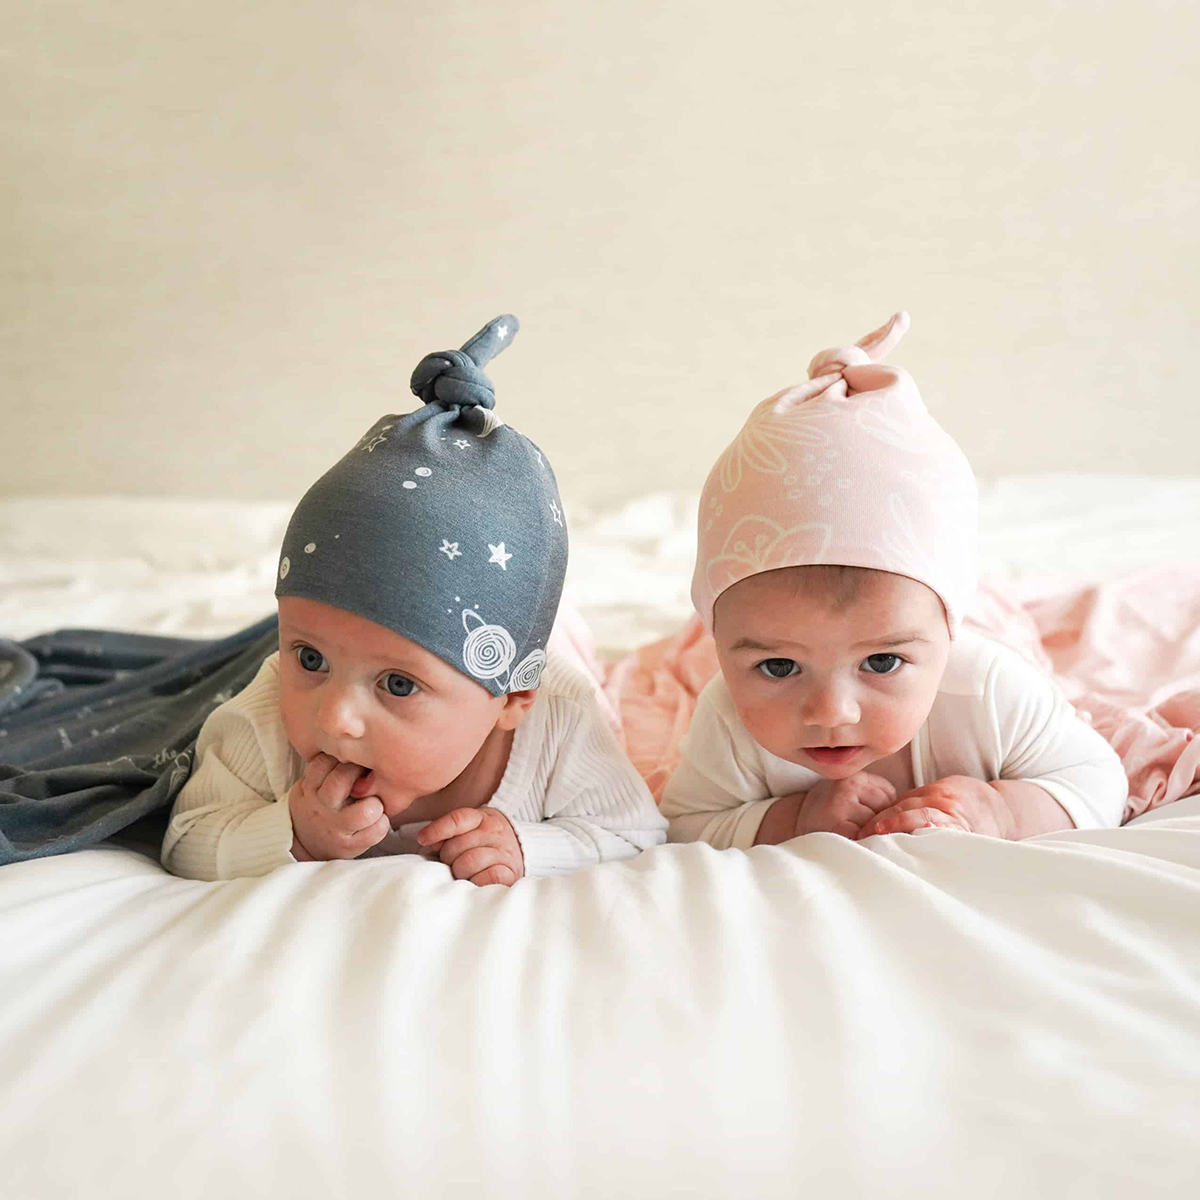 babies wearing knit top knot hats